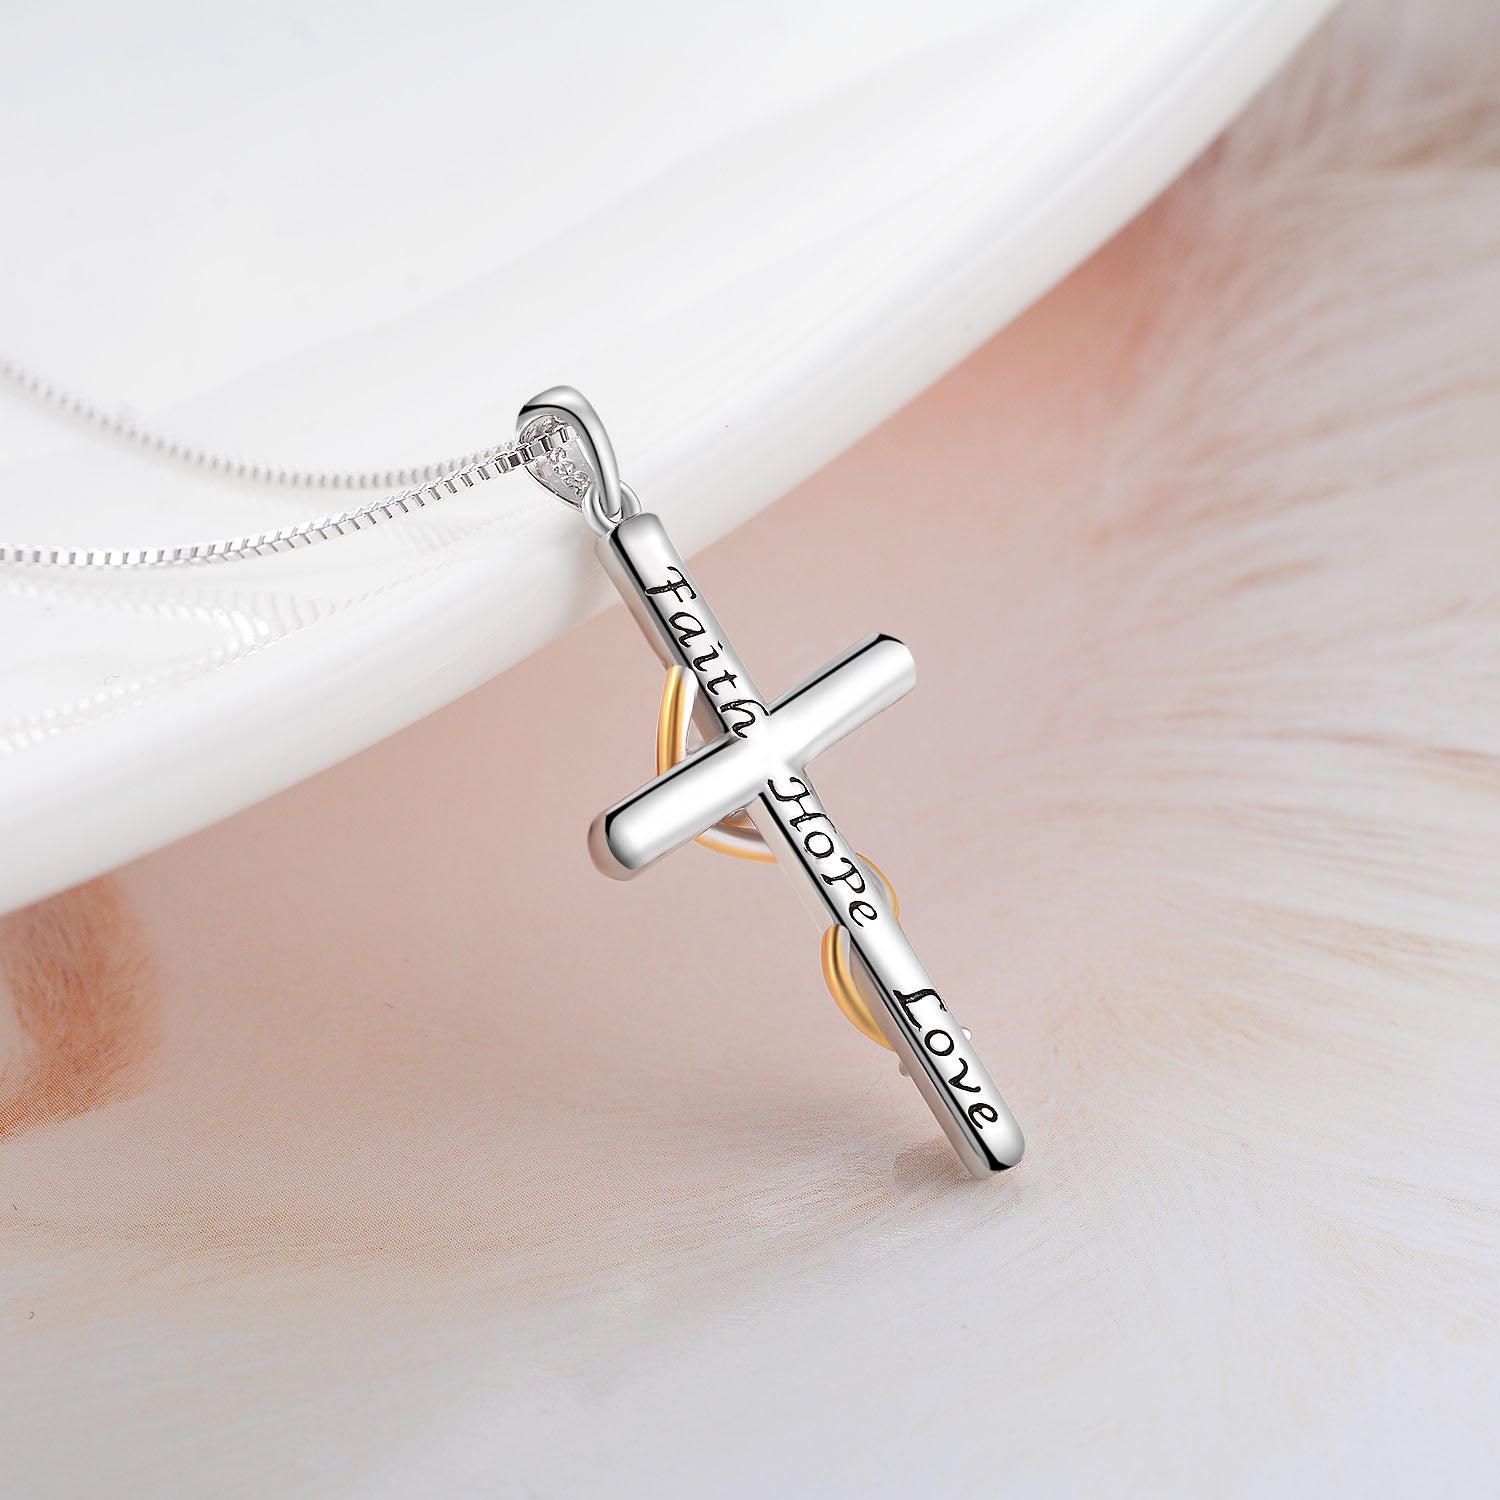 Pearl Cross Necklace Yellow Silver Thread Winding Fashionable Plating Necklace